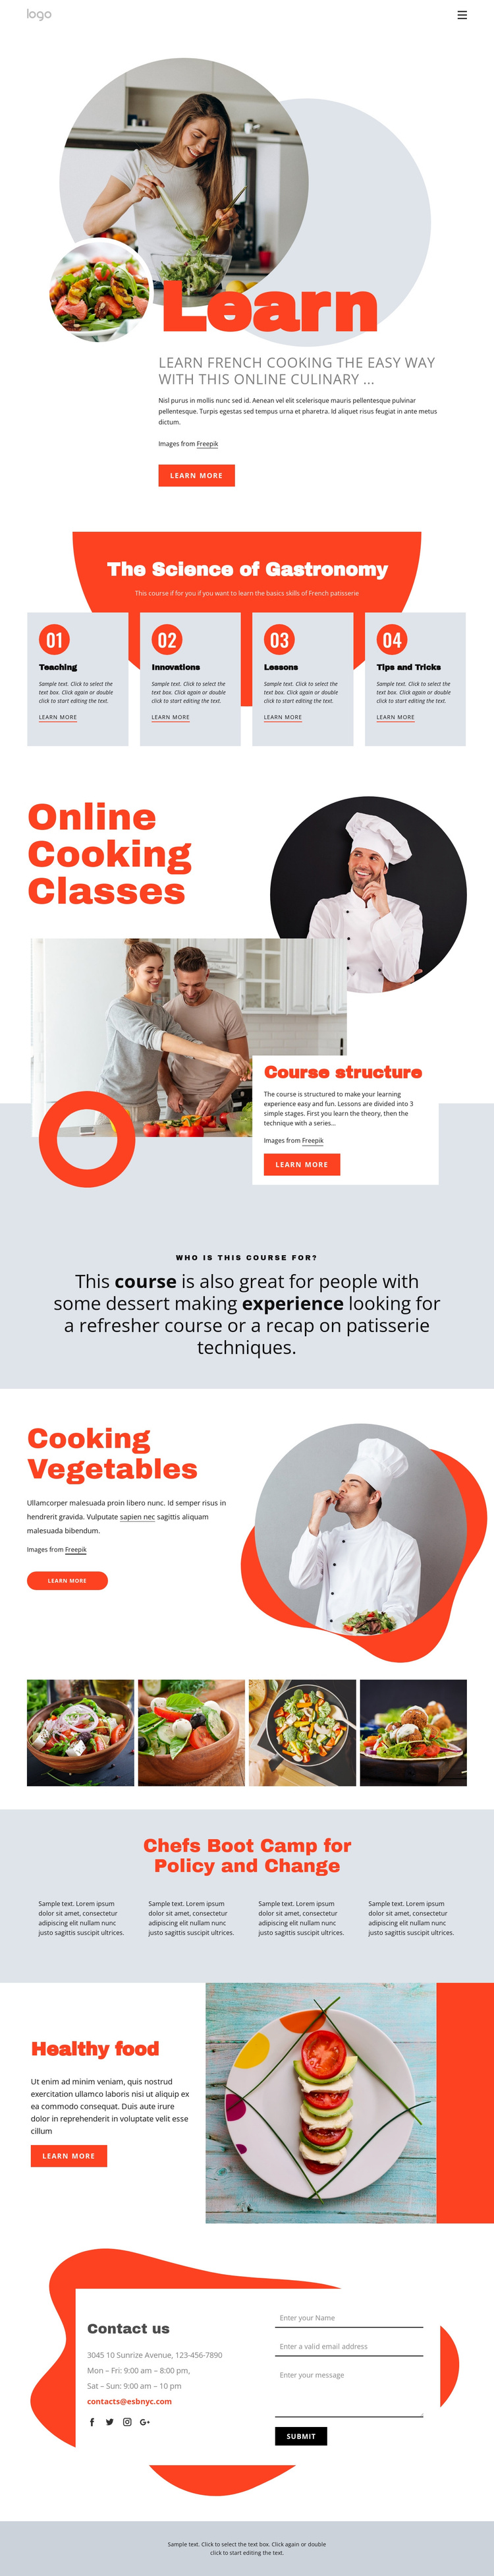 Learn cooking the easy way Joomla Template